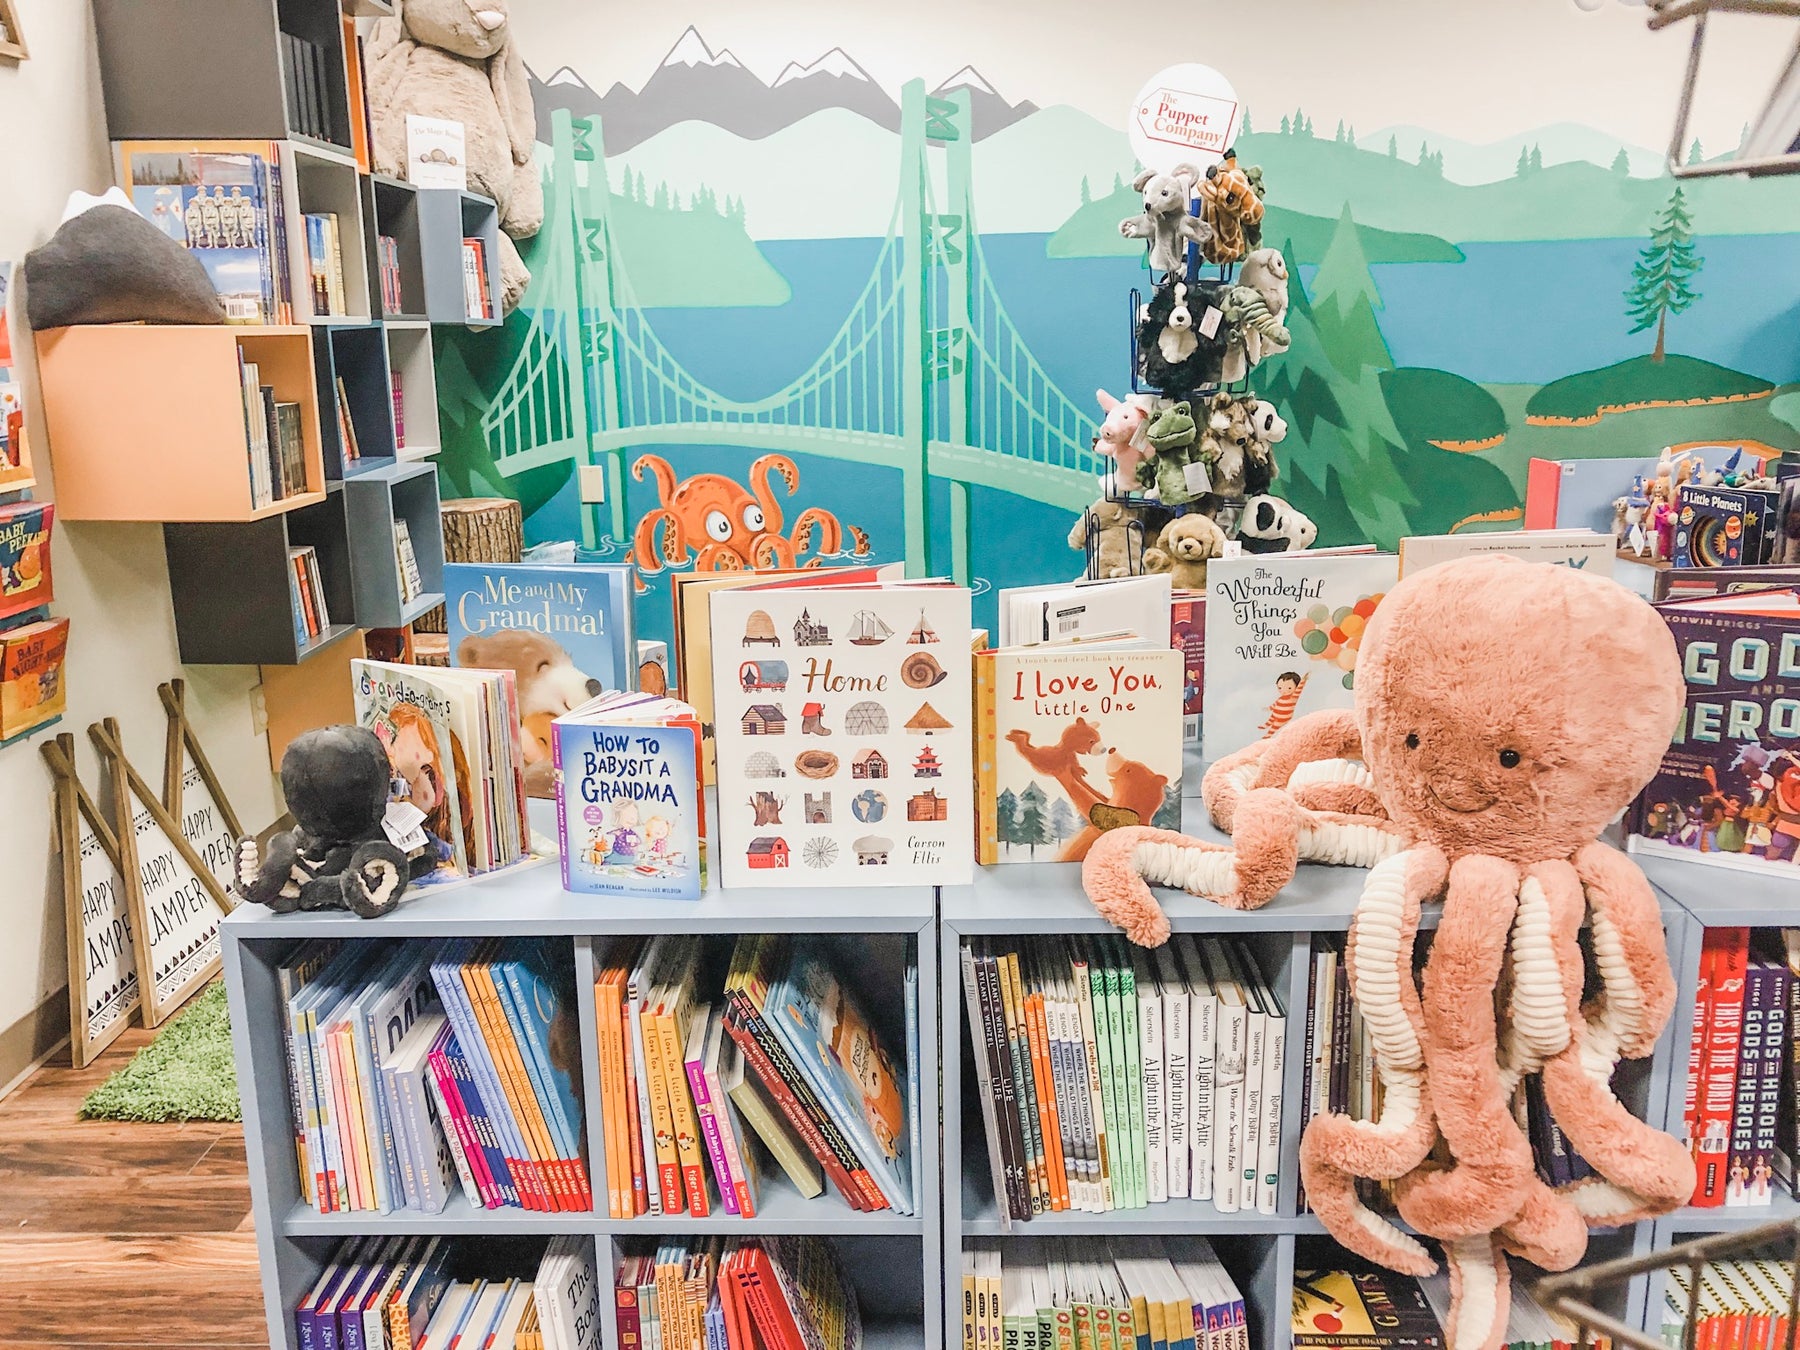 Bunk 9's Guide to Growing Up – The Curious Bear Toy & Book Shop